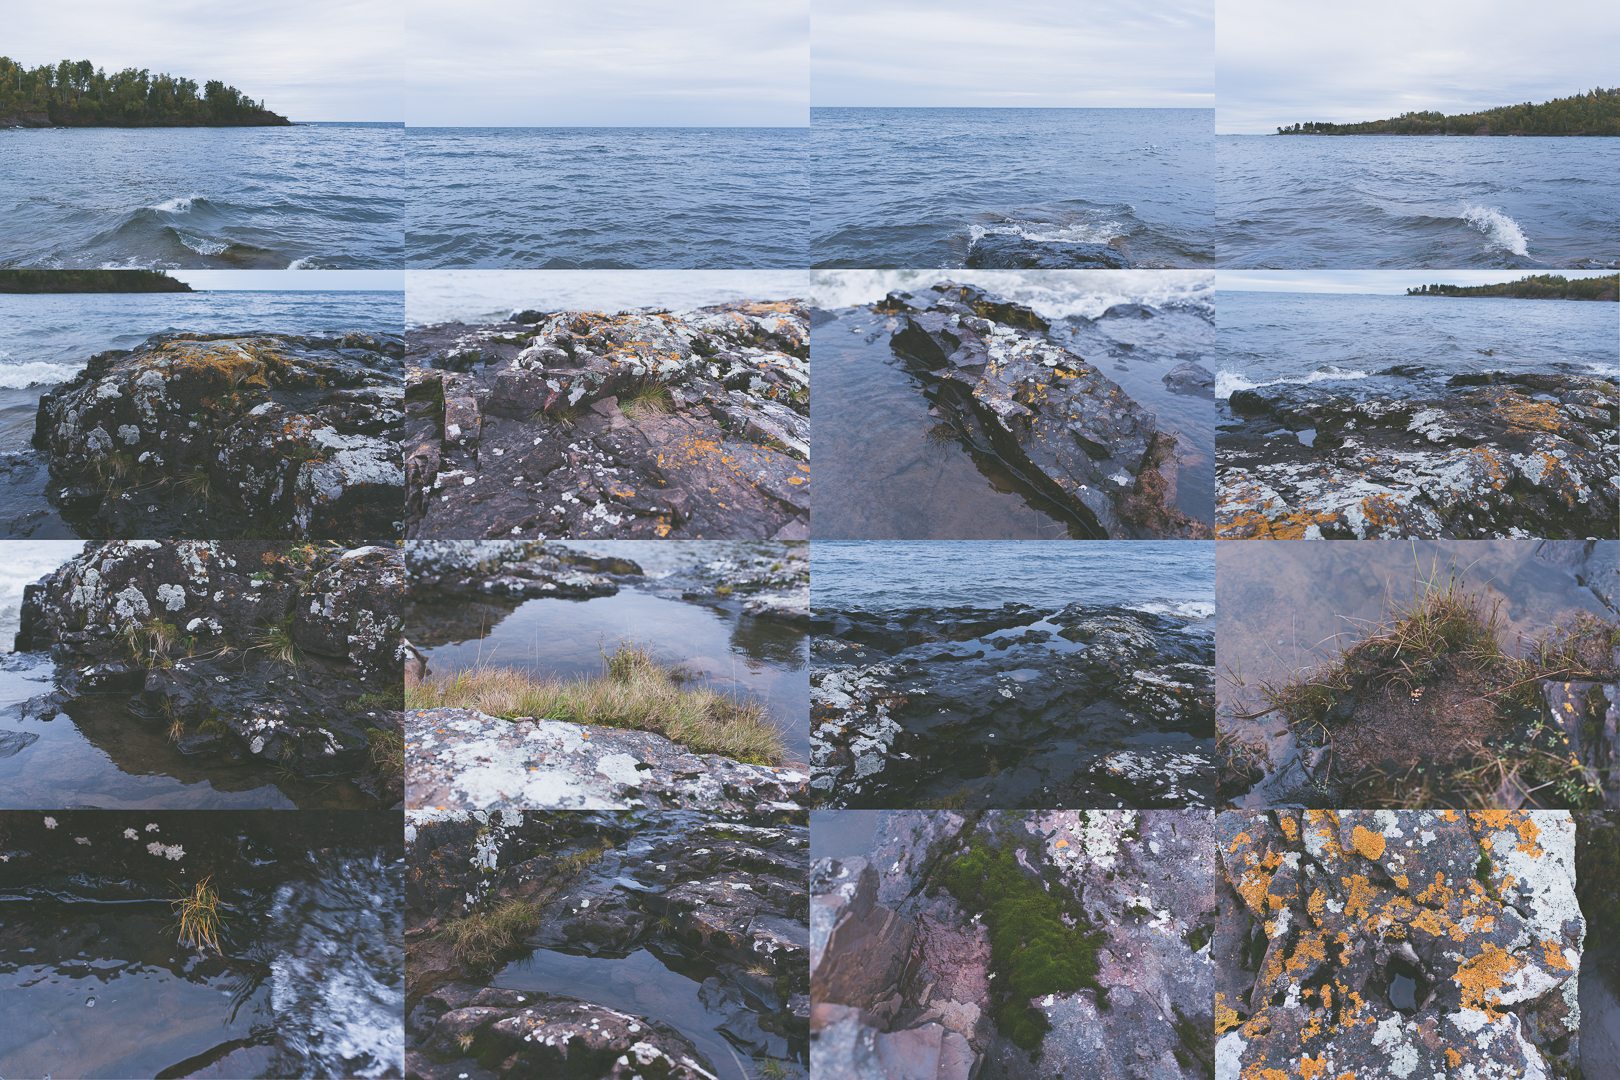 An artistic attempt of stitching images together on a dark day alongside Lake Superior's north shore in Minnesota.